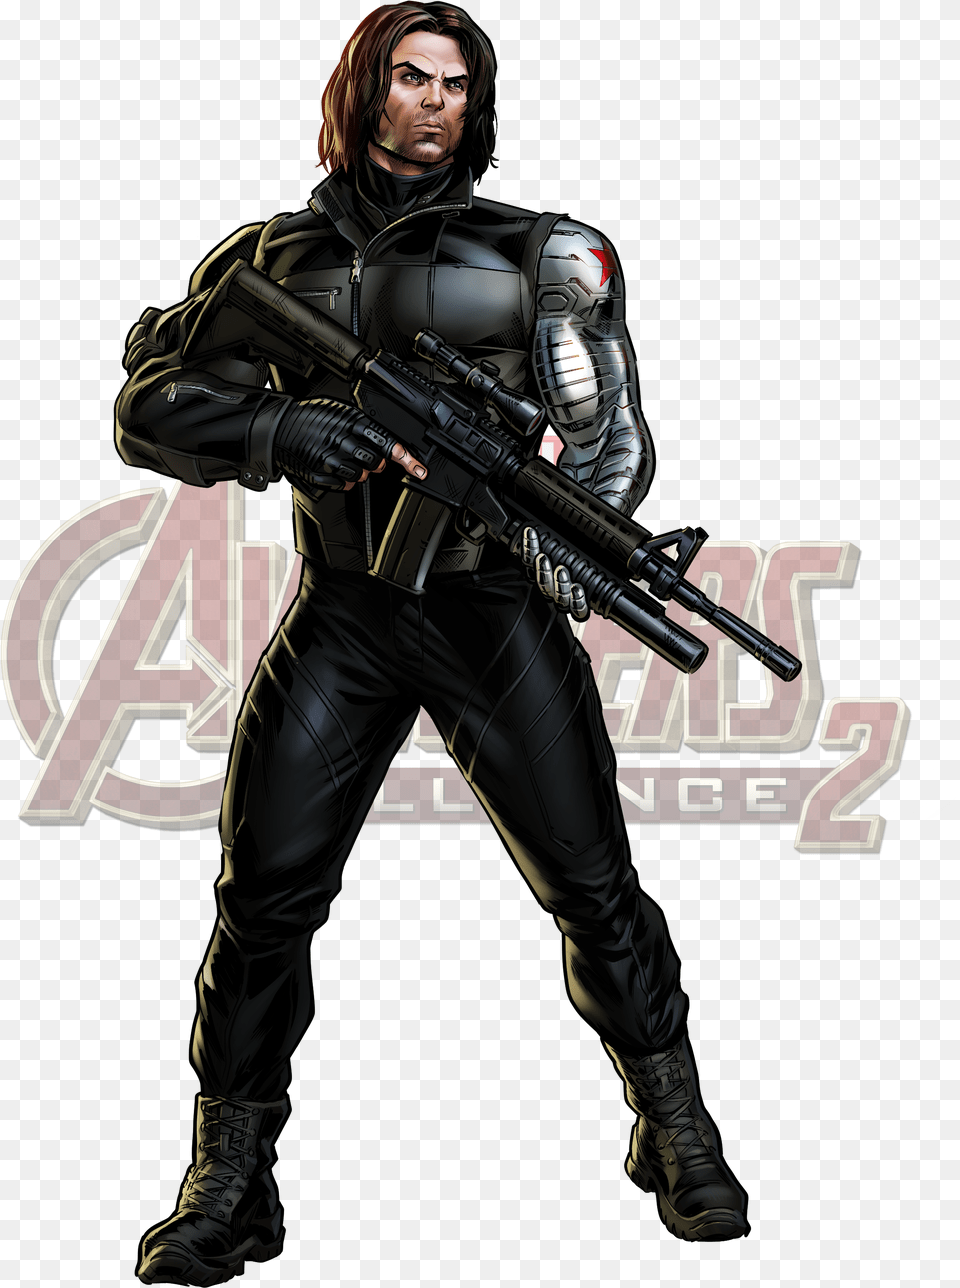 Avengers Alliance 2 Wikia Marvel Ultimate Alliance 3 Winter Soldier, Clothing, Coat, Jacket, Adult Free Png